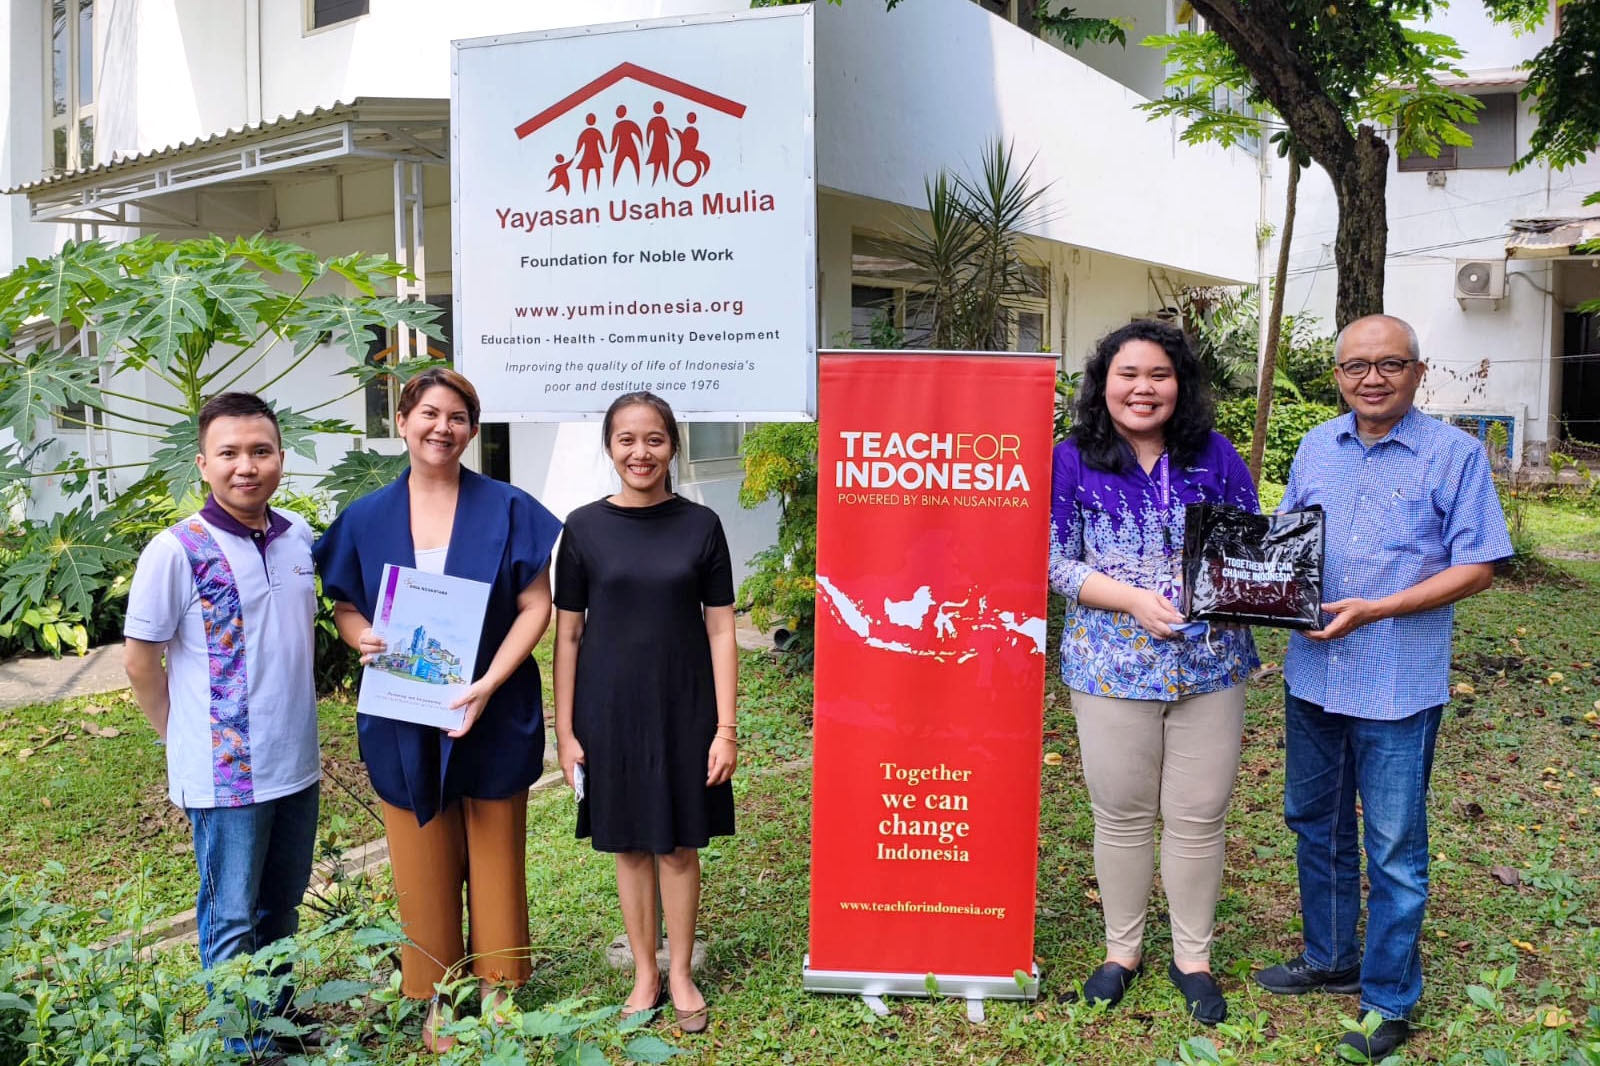 Recently, YUM signed a partnership agreement with Teach for Indonesia, a Community Program initiated by Bina Nusantara (BINUS) University that is concerned with aspects of learning with the concept of community development 